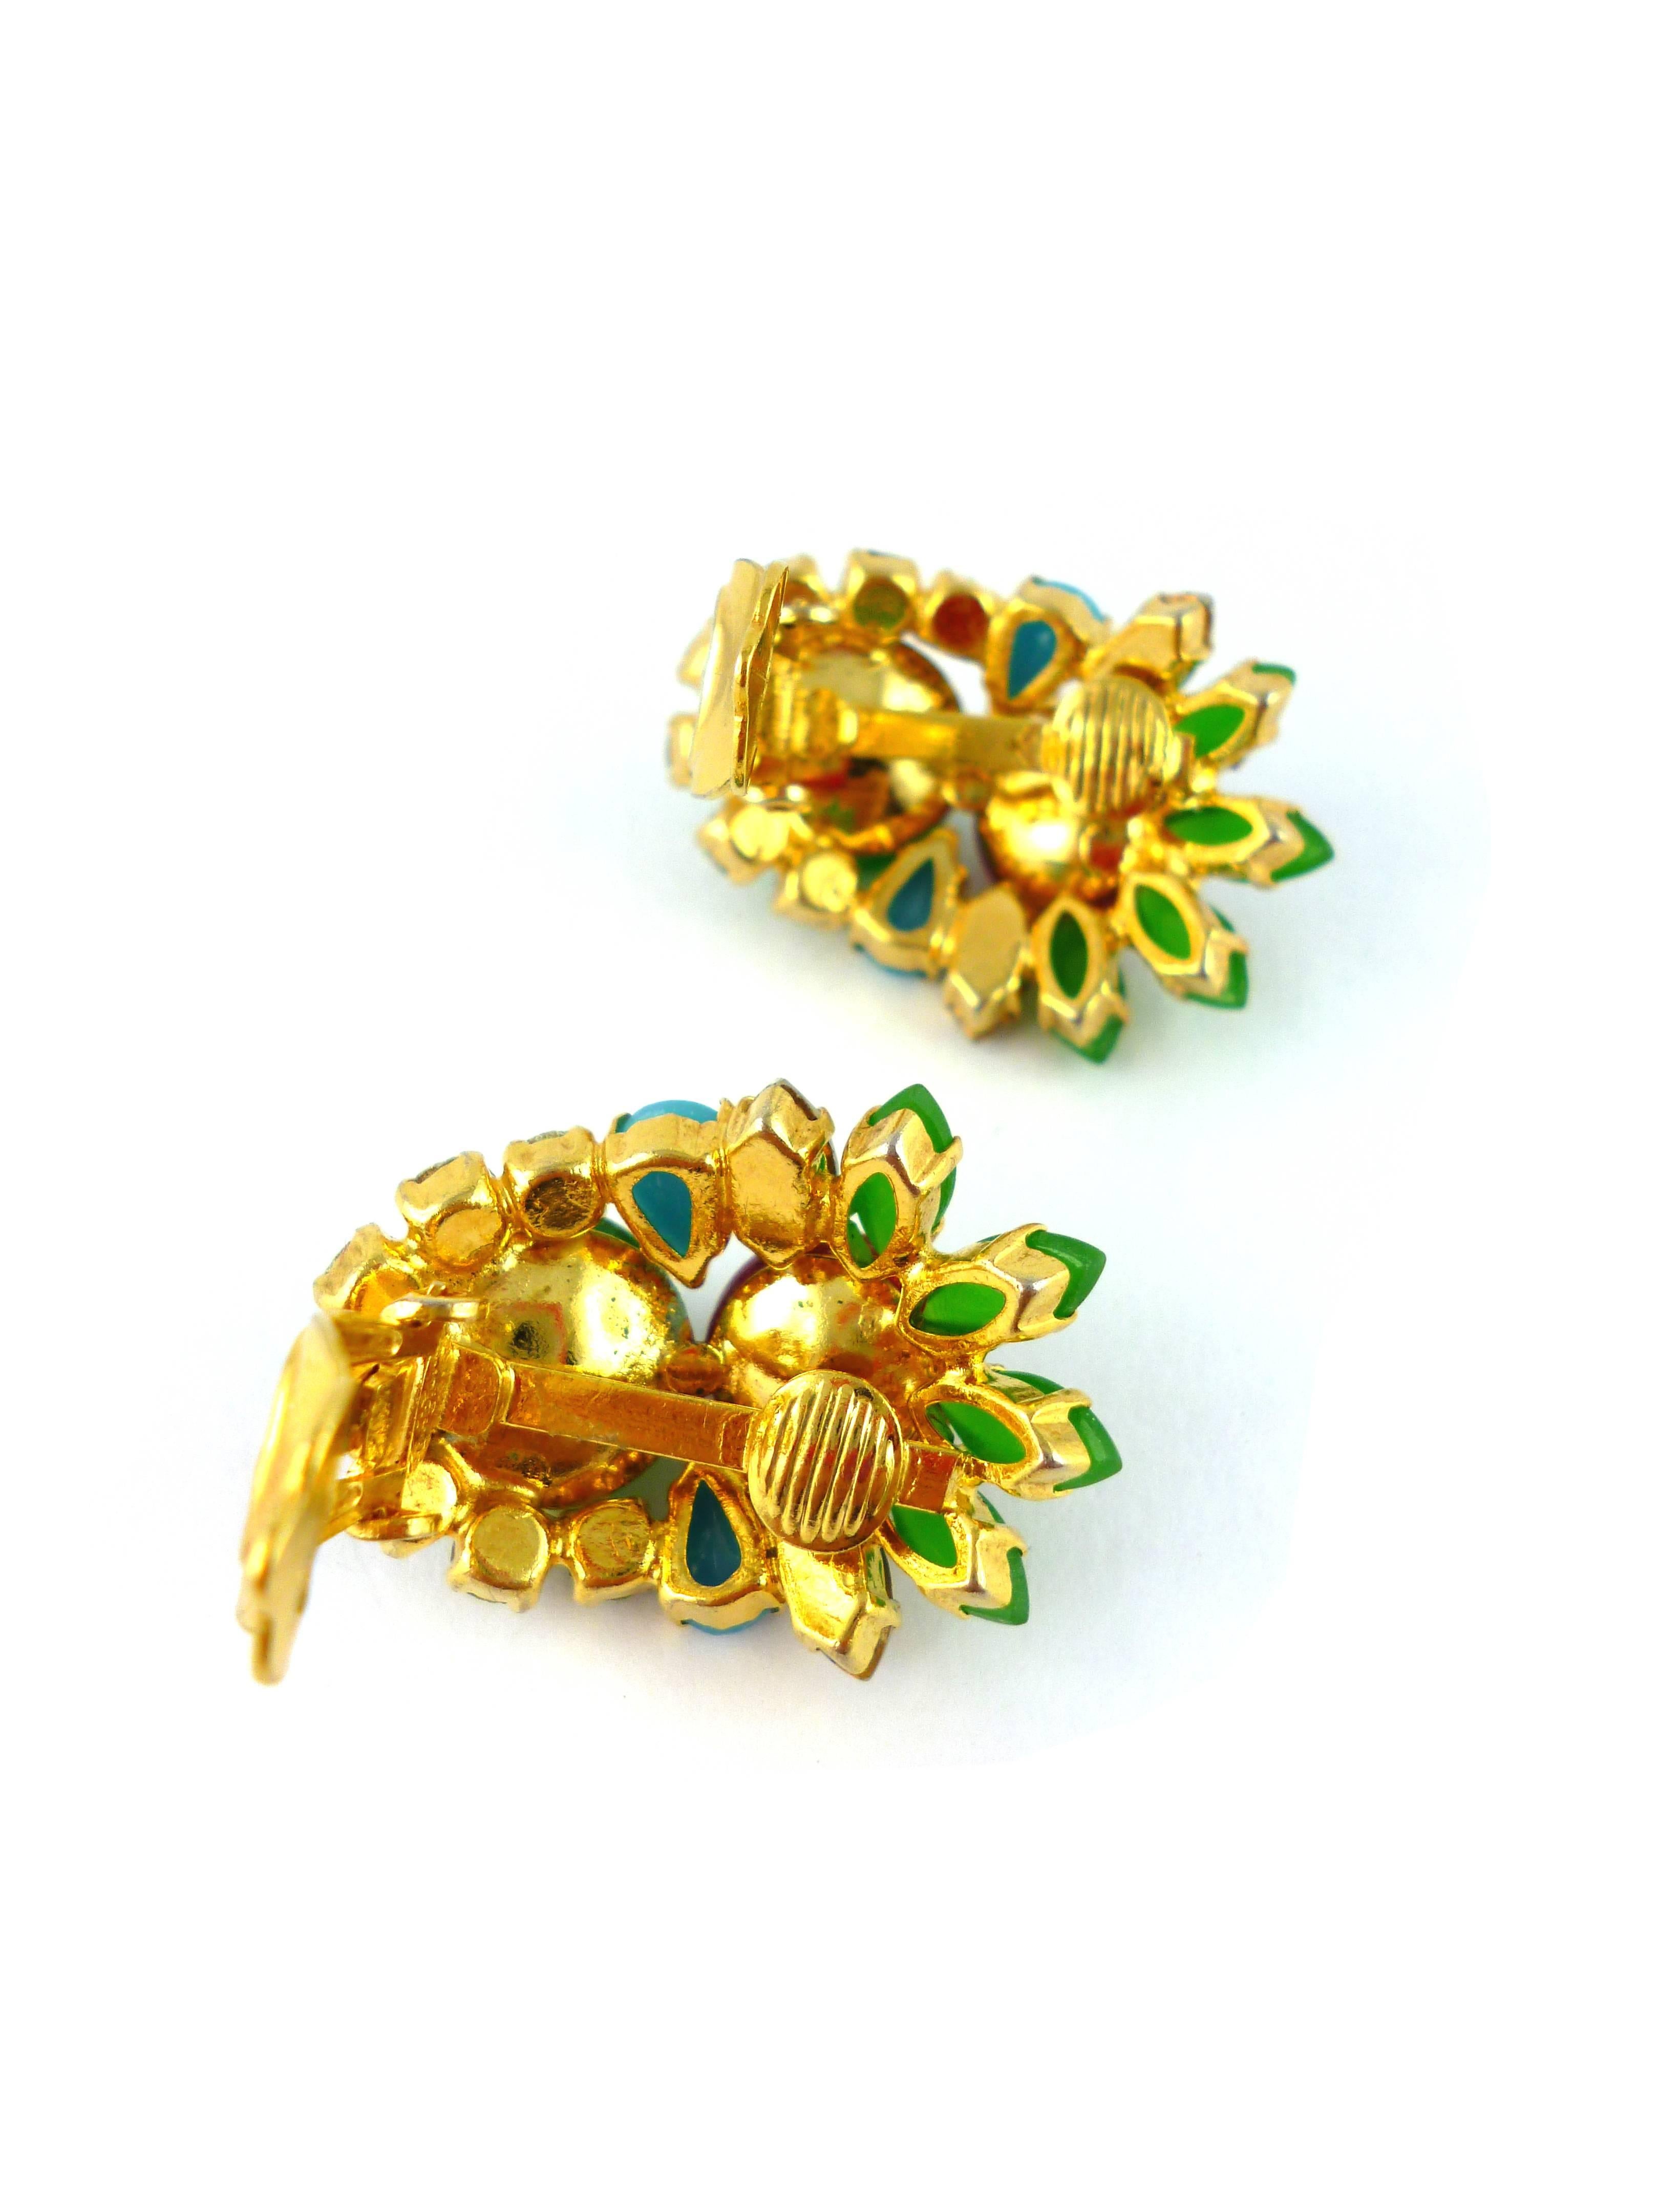 Christian Dior Vintage 1967 Mughal Inspired Clip On Earrings 2